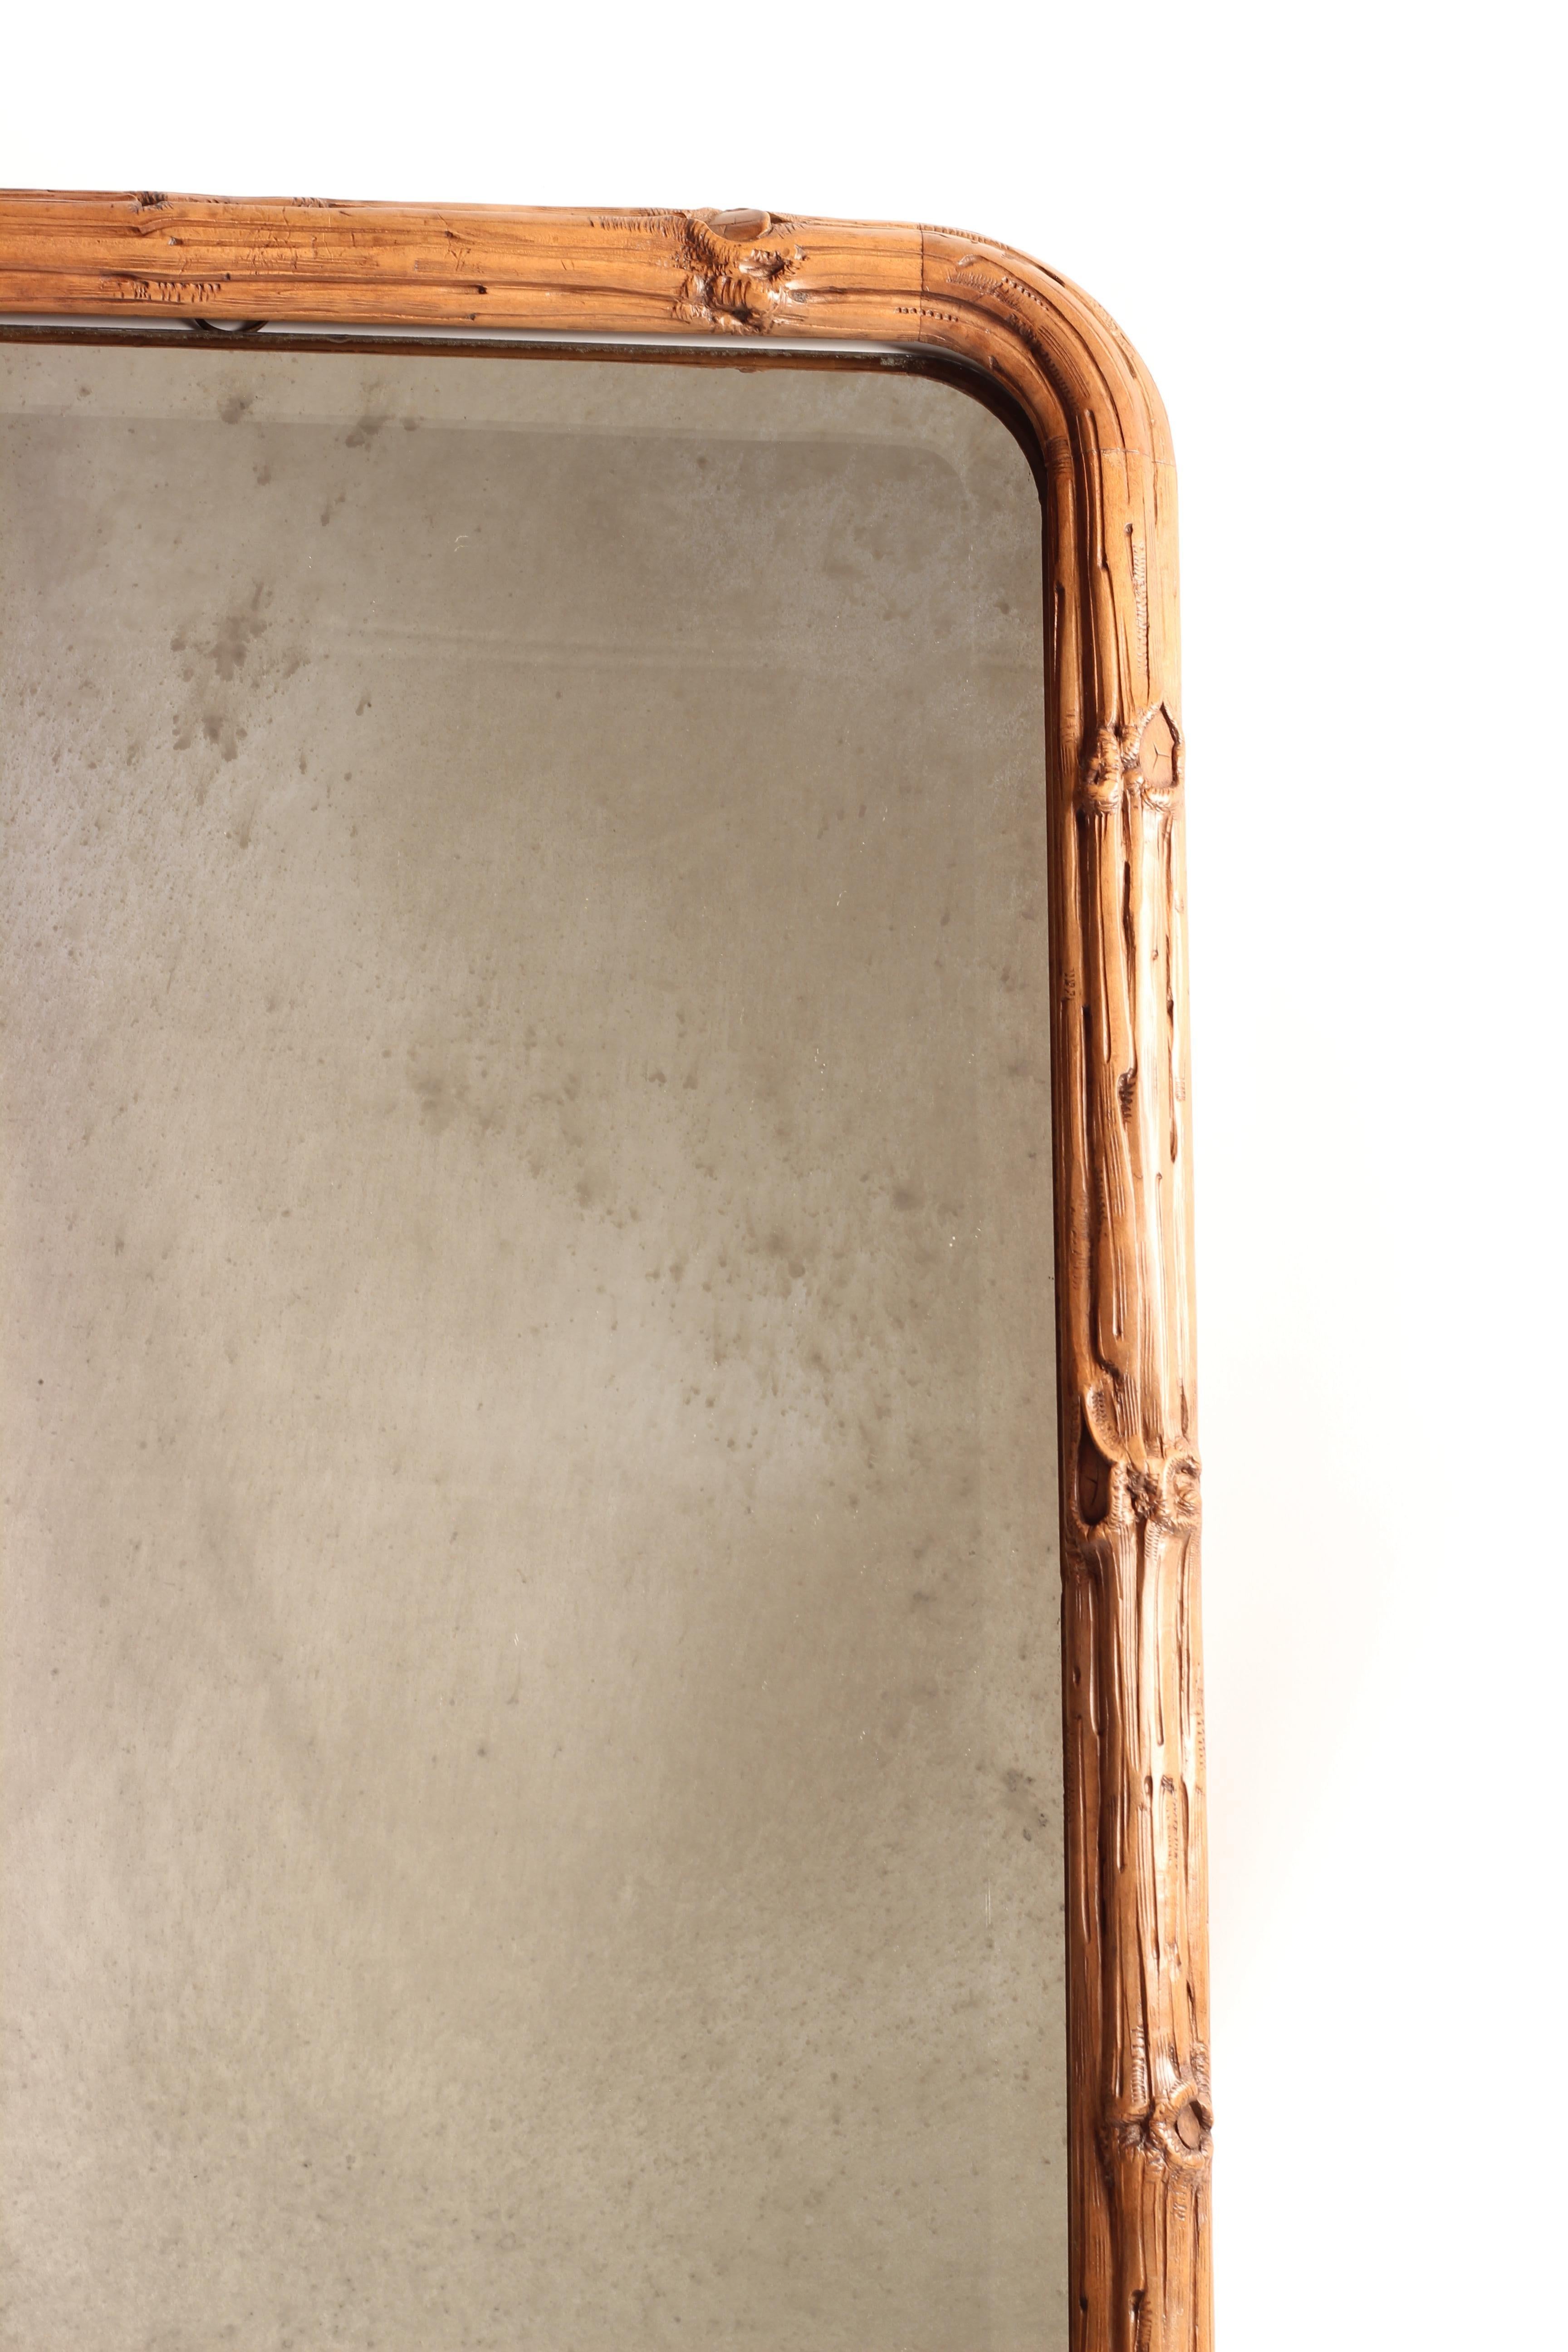 This is one of a pair of incredibly skilfully carved beautiful mirrors, that replicate a border of branches wrapping around a curved bevelled original mirror. The carving is in very good original condition, with the mirror showing no signs of chips